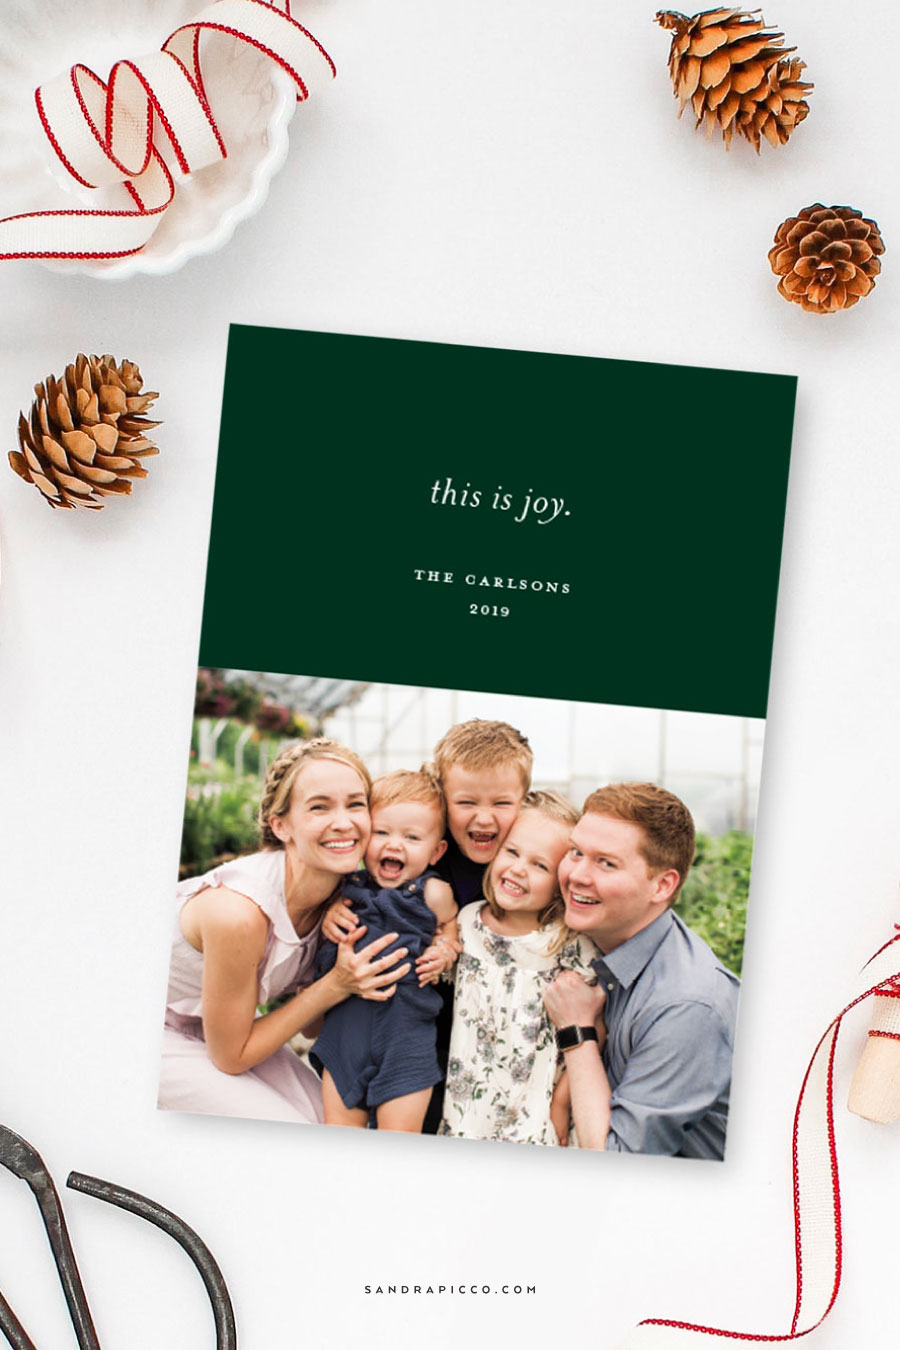 This is Joy modern holiday photo card